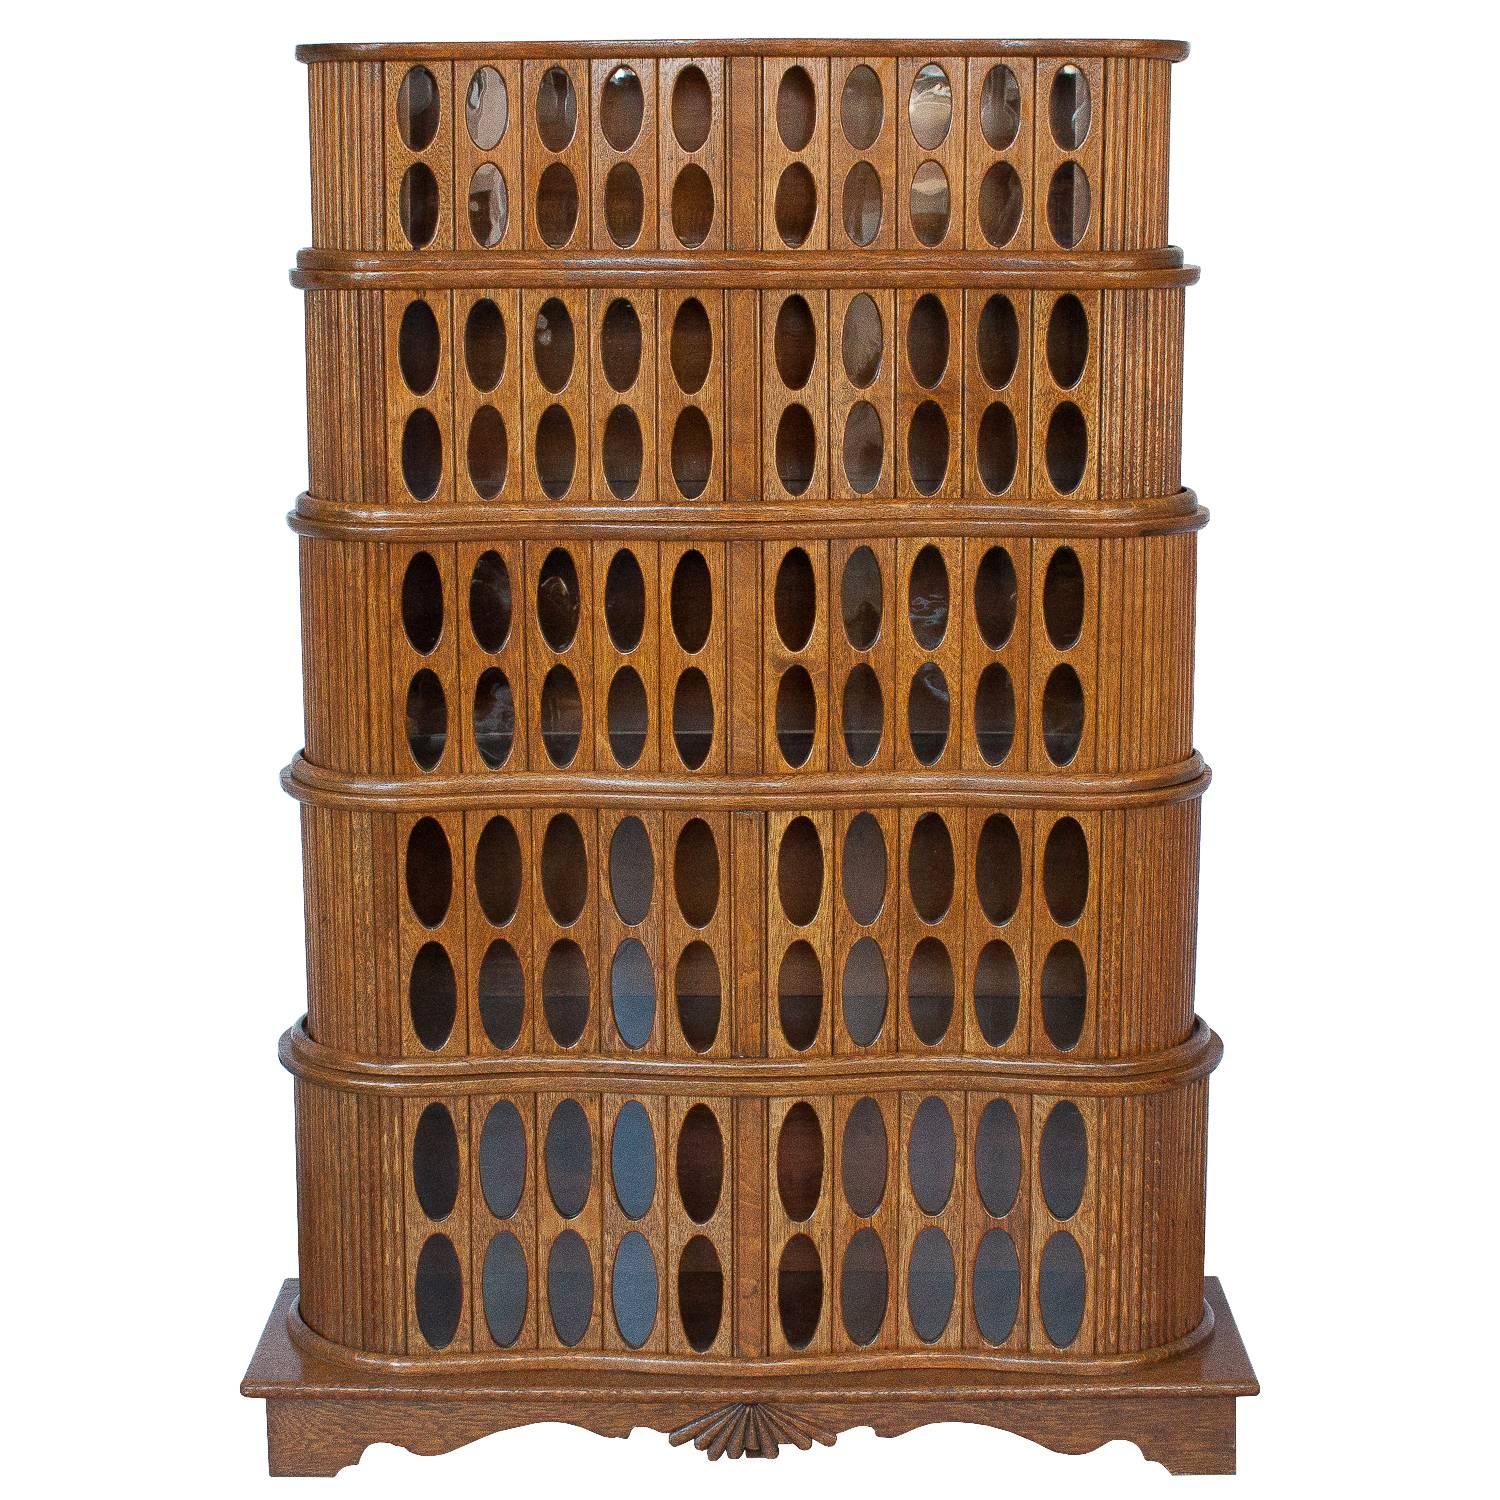 Striking and unusual this 1930s solid oak cabinet features a stacked barrister inspired design with elliptical shaped glass windows. Bridging the Arts & Crafts movement and modernism, this cabinet shows the craftsman's woodworking skills and